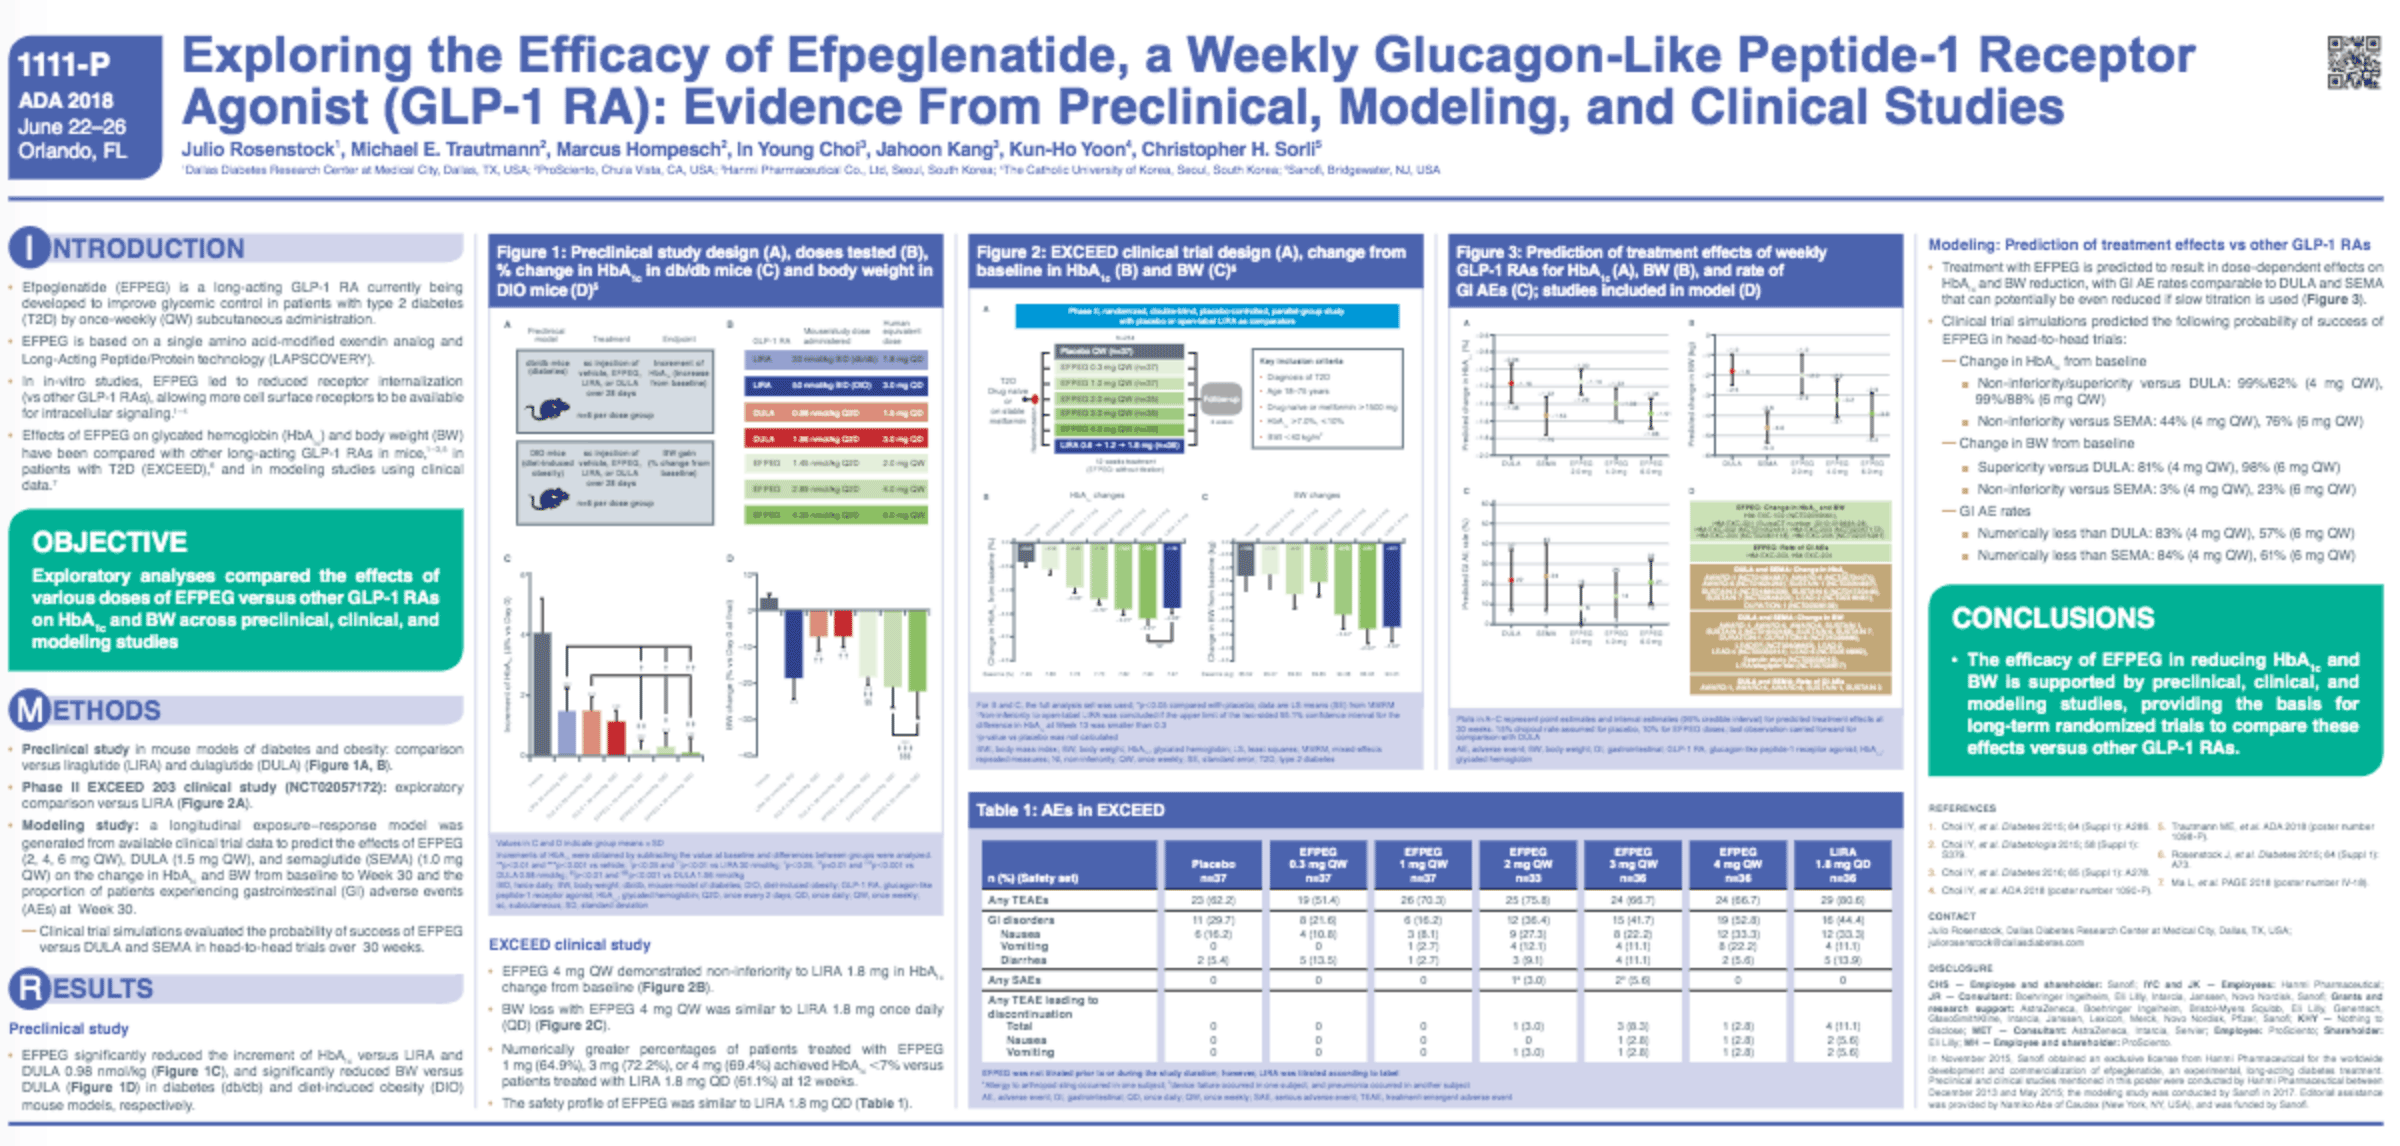 Exploring the Efficacy of Efpeglenatide, a Weekly Glucagon-Like Peptide-1 Receptor Agonist (GLP-1RA)—Evidence from Preclinical, Modeling, and Clinical Studies thumbnail